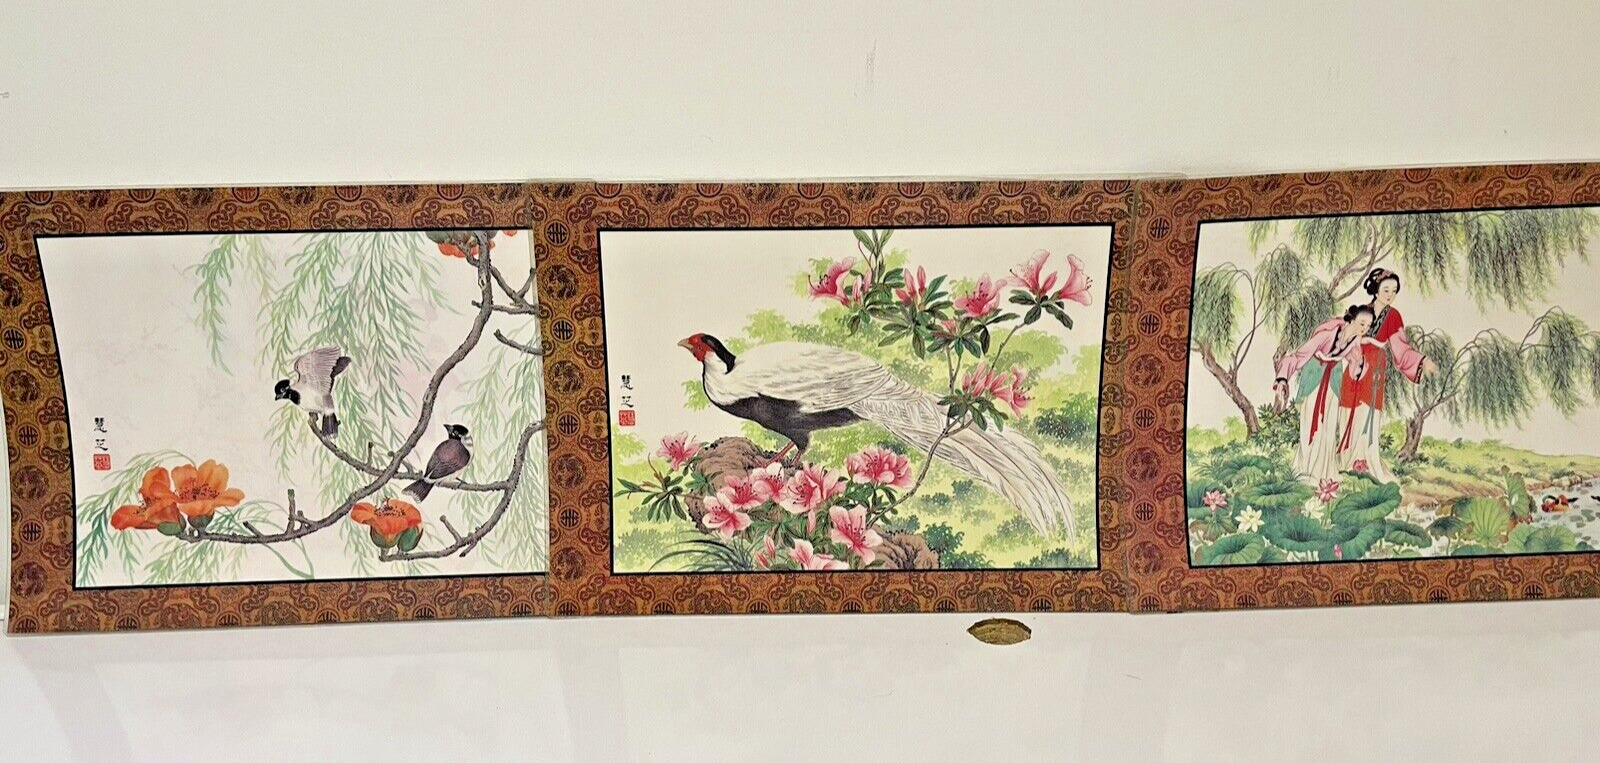 3 VIntage Plastic Doubled Sided Placemats - One Side Ladies/Birds - Chinese